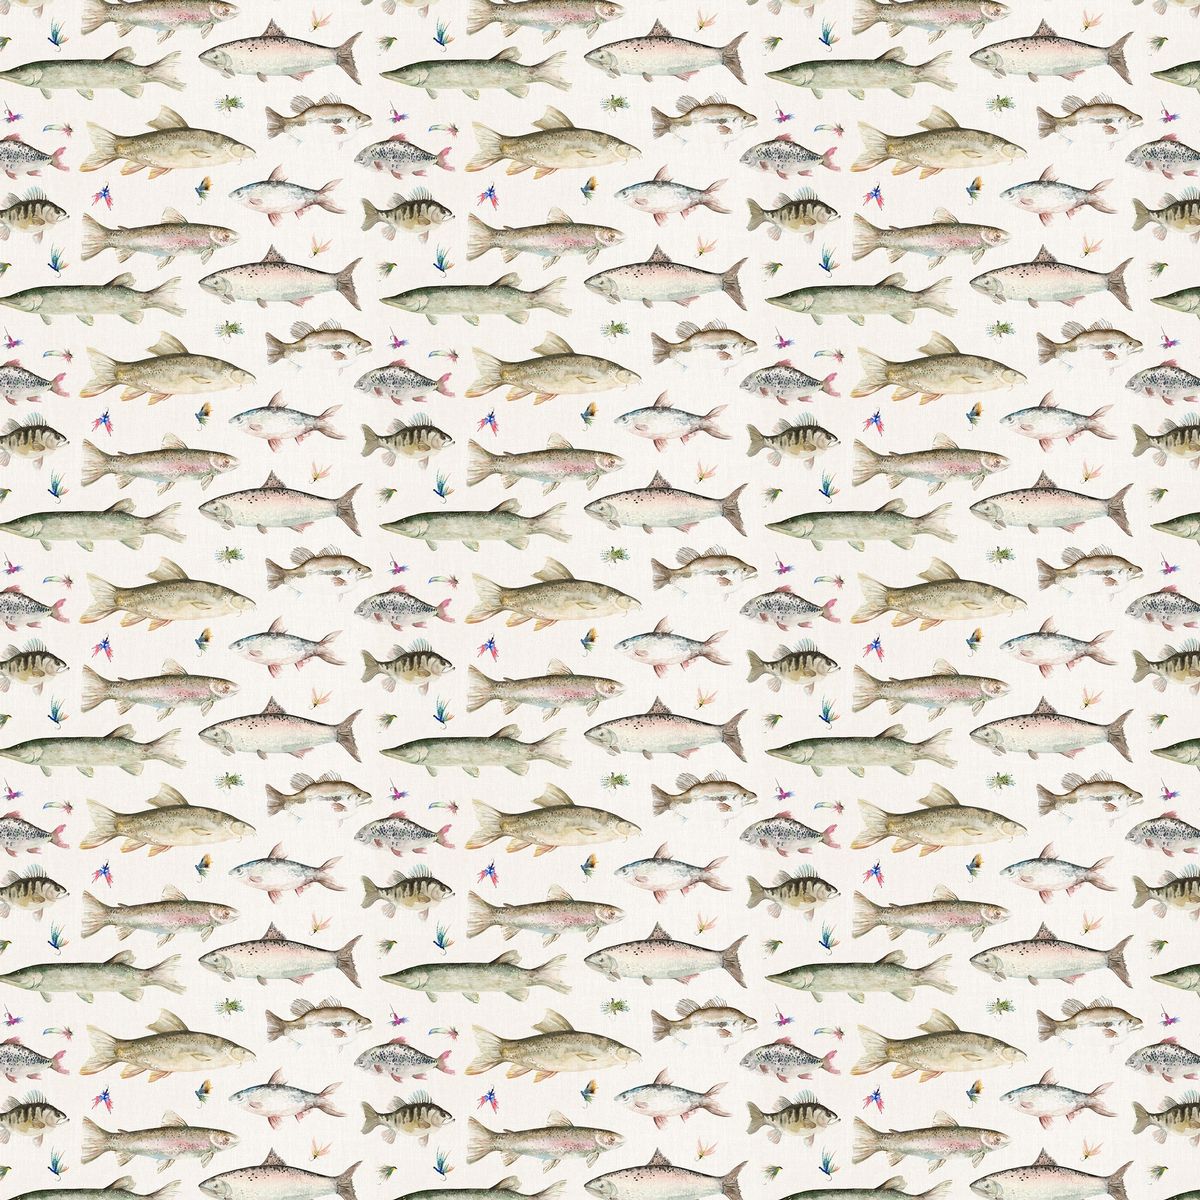 River Fish Cream Fabric by Voyage Maison